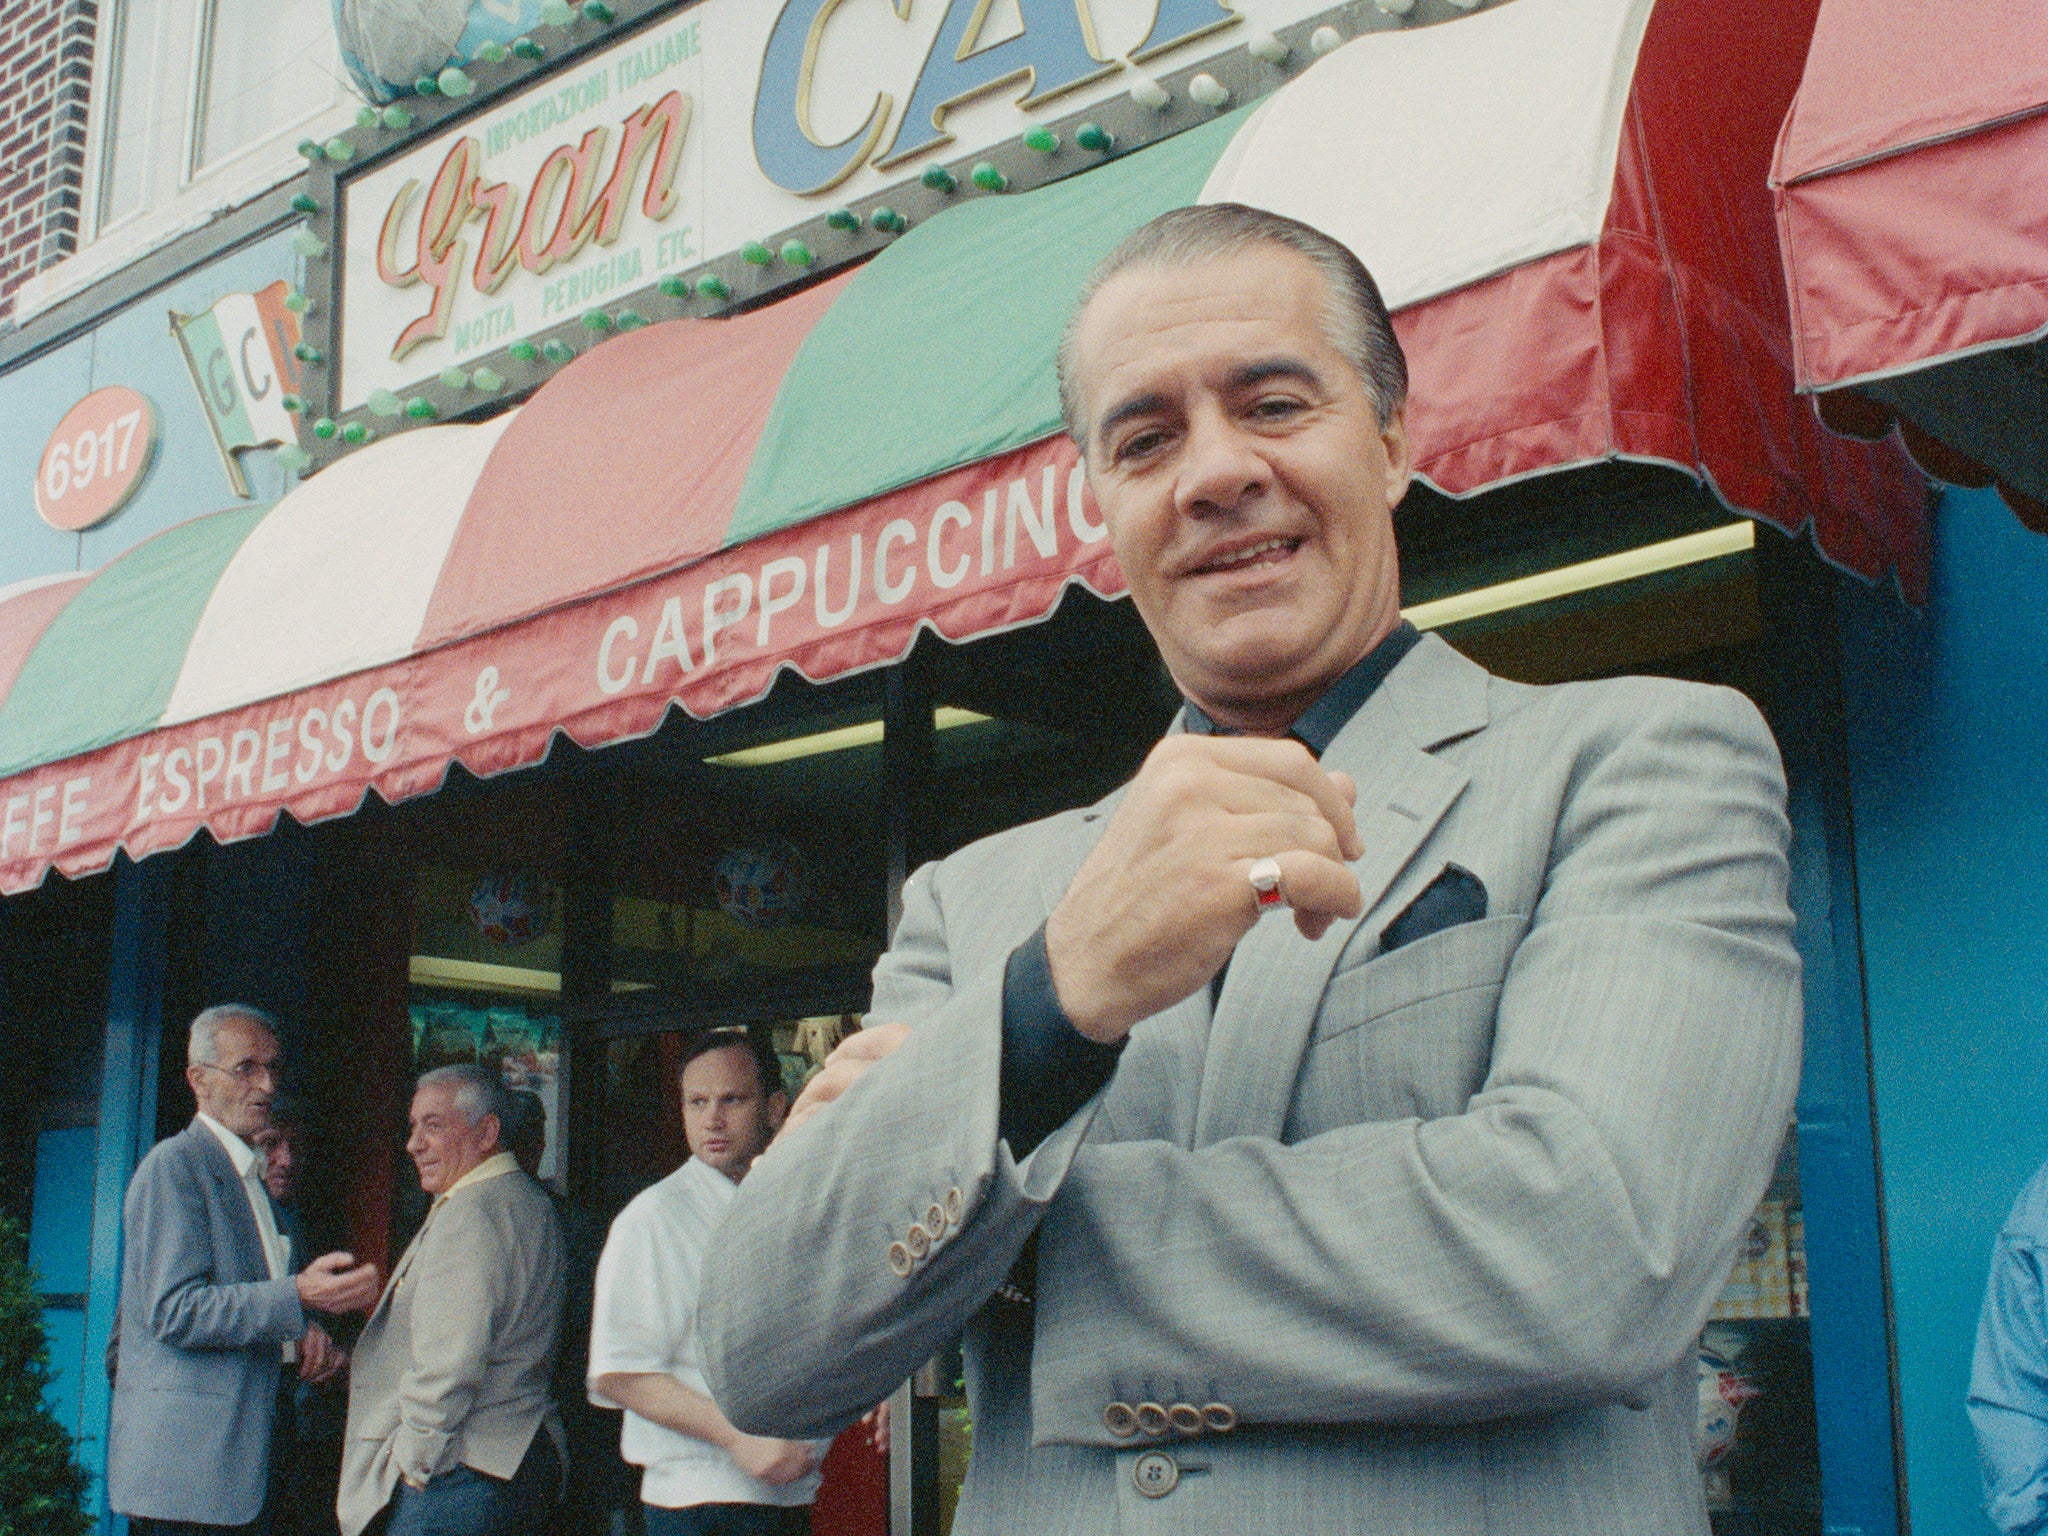 ‘Half a wise guy’: Siricco in 1990, around the time of his breakout movie role in ‘Goodfellas’